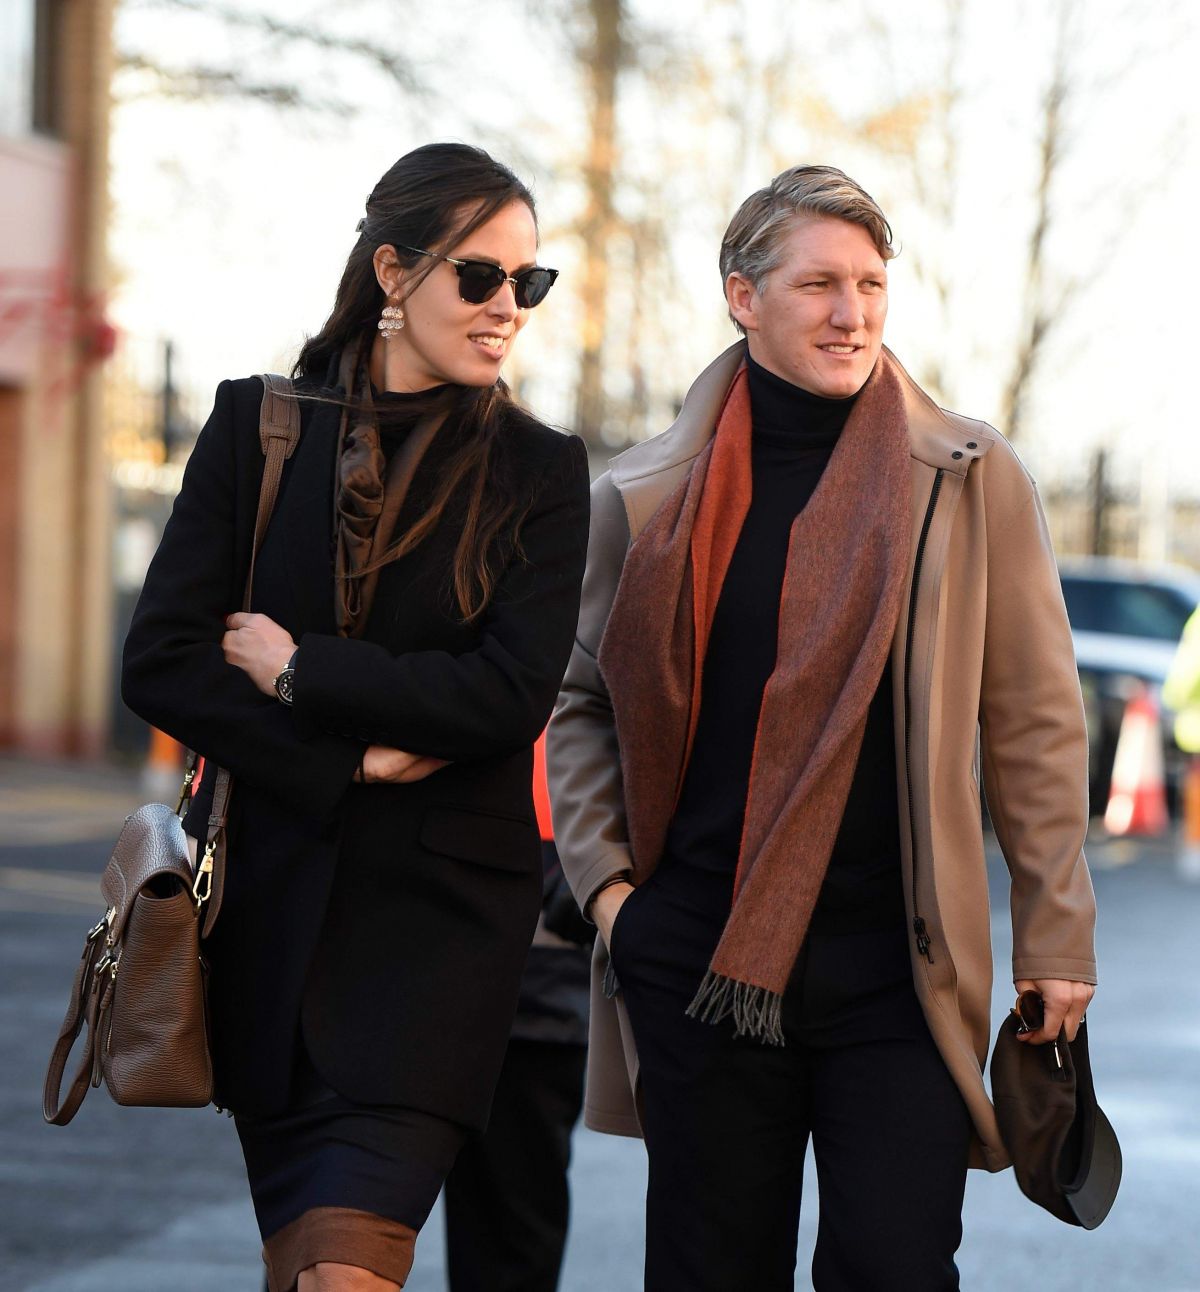 ANA IVANOVIC and Bastian Schweinsteiger at Old Traford in Manchester 11